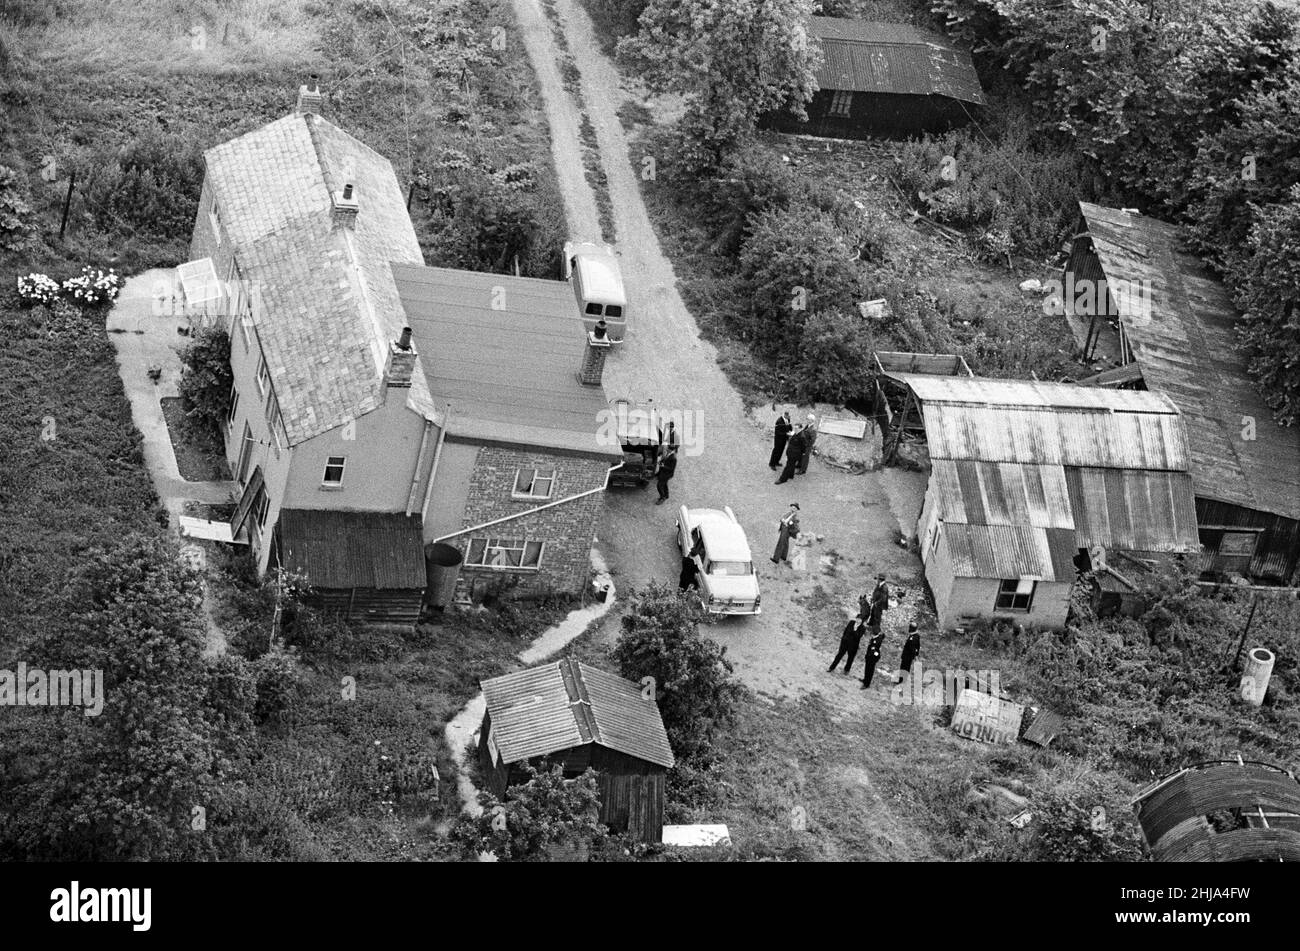 Leatherslade Farm, between Oakley and Brill in Buckinghamshire, hideout used by gang, 27 miles from the crime scene, Tuesday 13th August 1963. Our Picture Shows ... aerial view remote farmhouse in Buckinghamshire countryside, used as hideaway by gang in immediate aftermath of robbery.   The 1963 Great Train Robbery was the robbery of 2.6 million pounds from a Royal Mail train heading from Glasgow to London on the West Coast Main Line in the early hours of 8th August 1963, at Bridego Railway Bridge, Ledburn, near Mentmore in  Buckinghamshire, England. Stock Photo